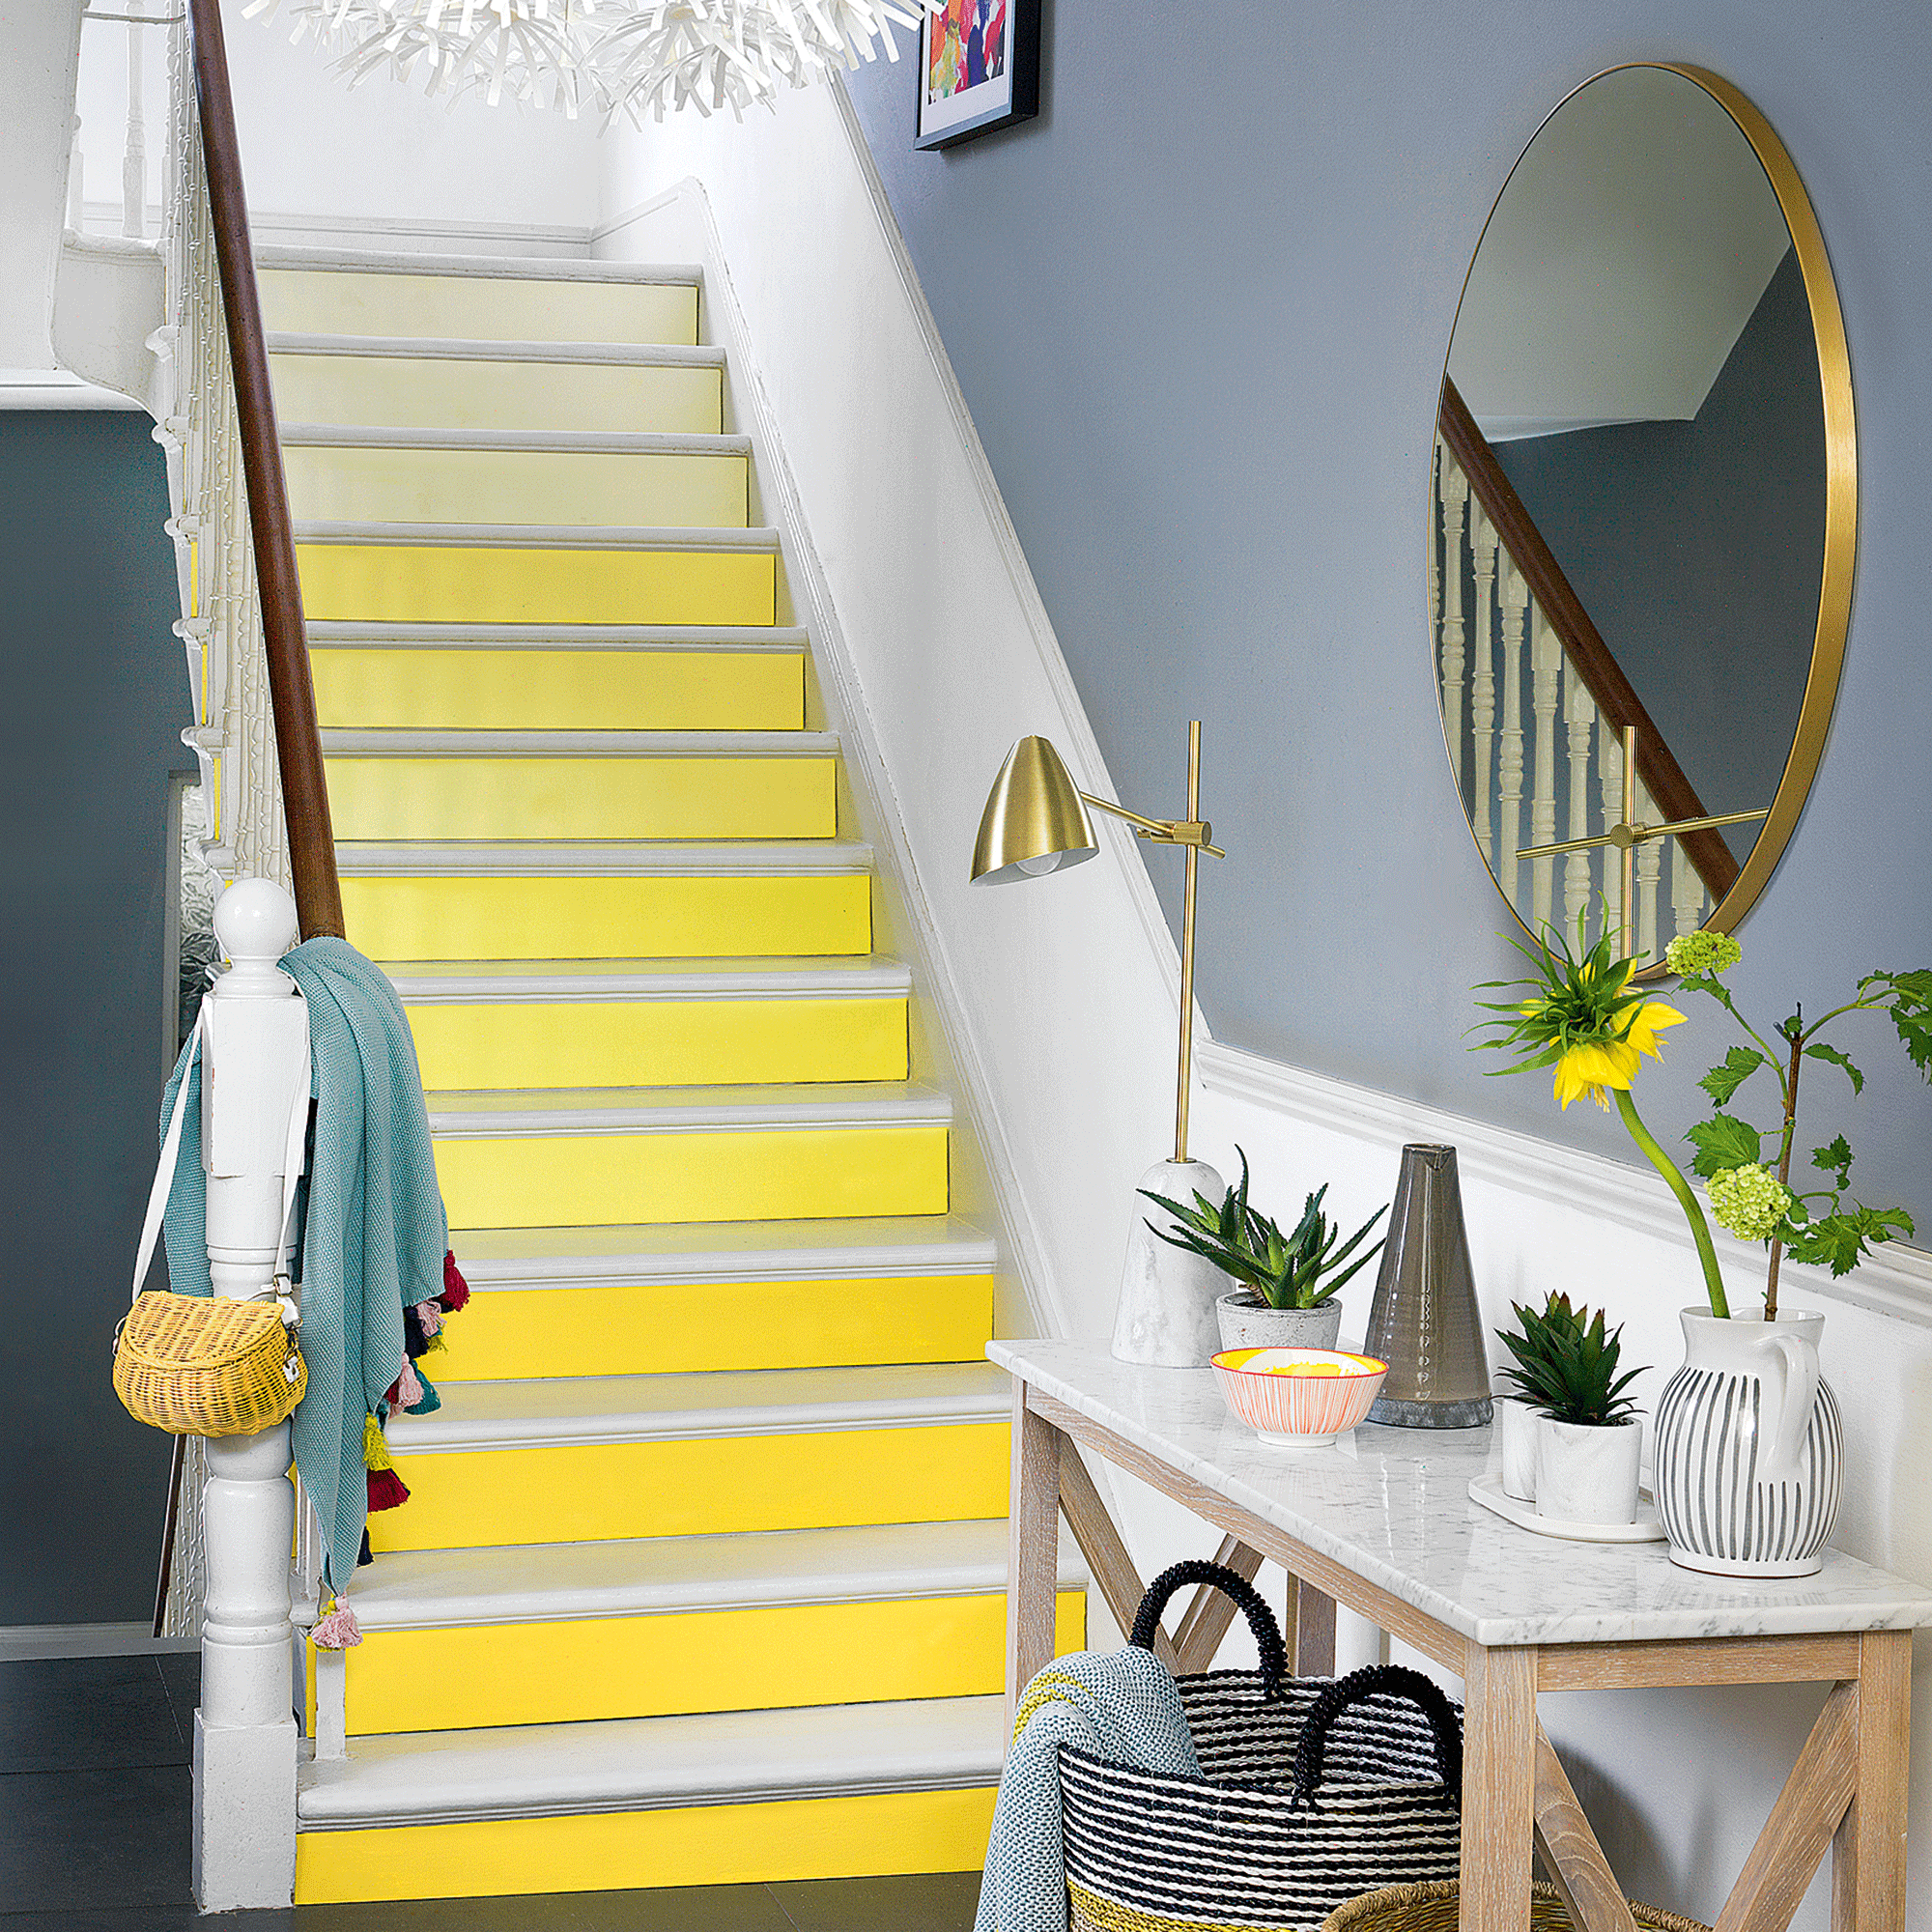 Hallway mirror ideas to add light and interest to your entrance